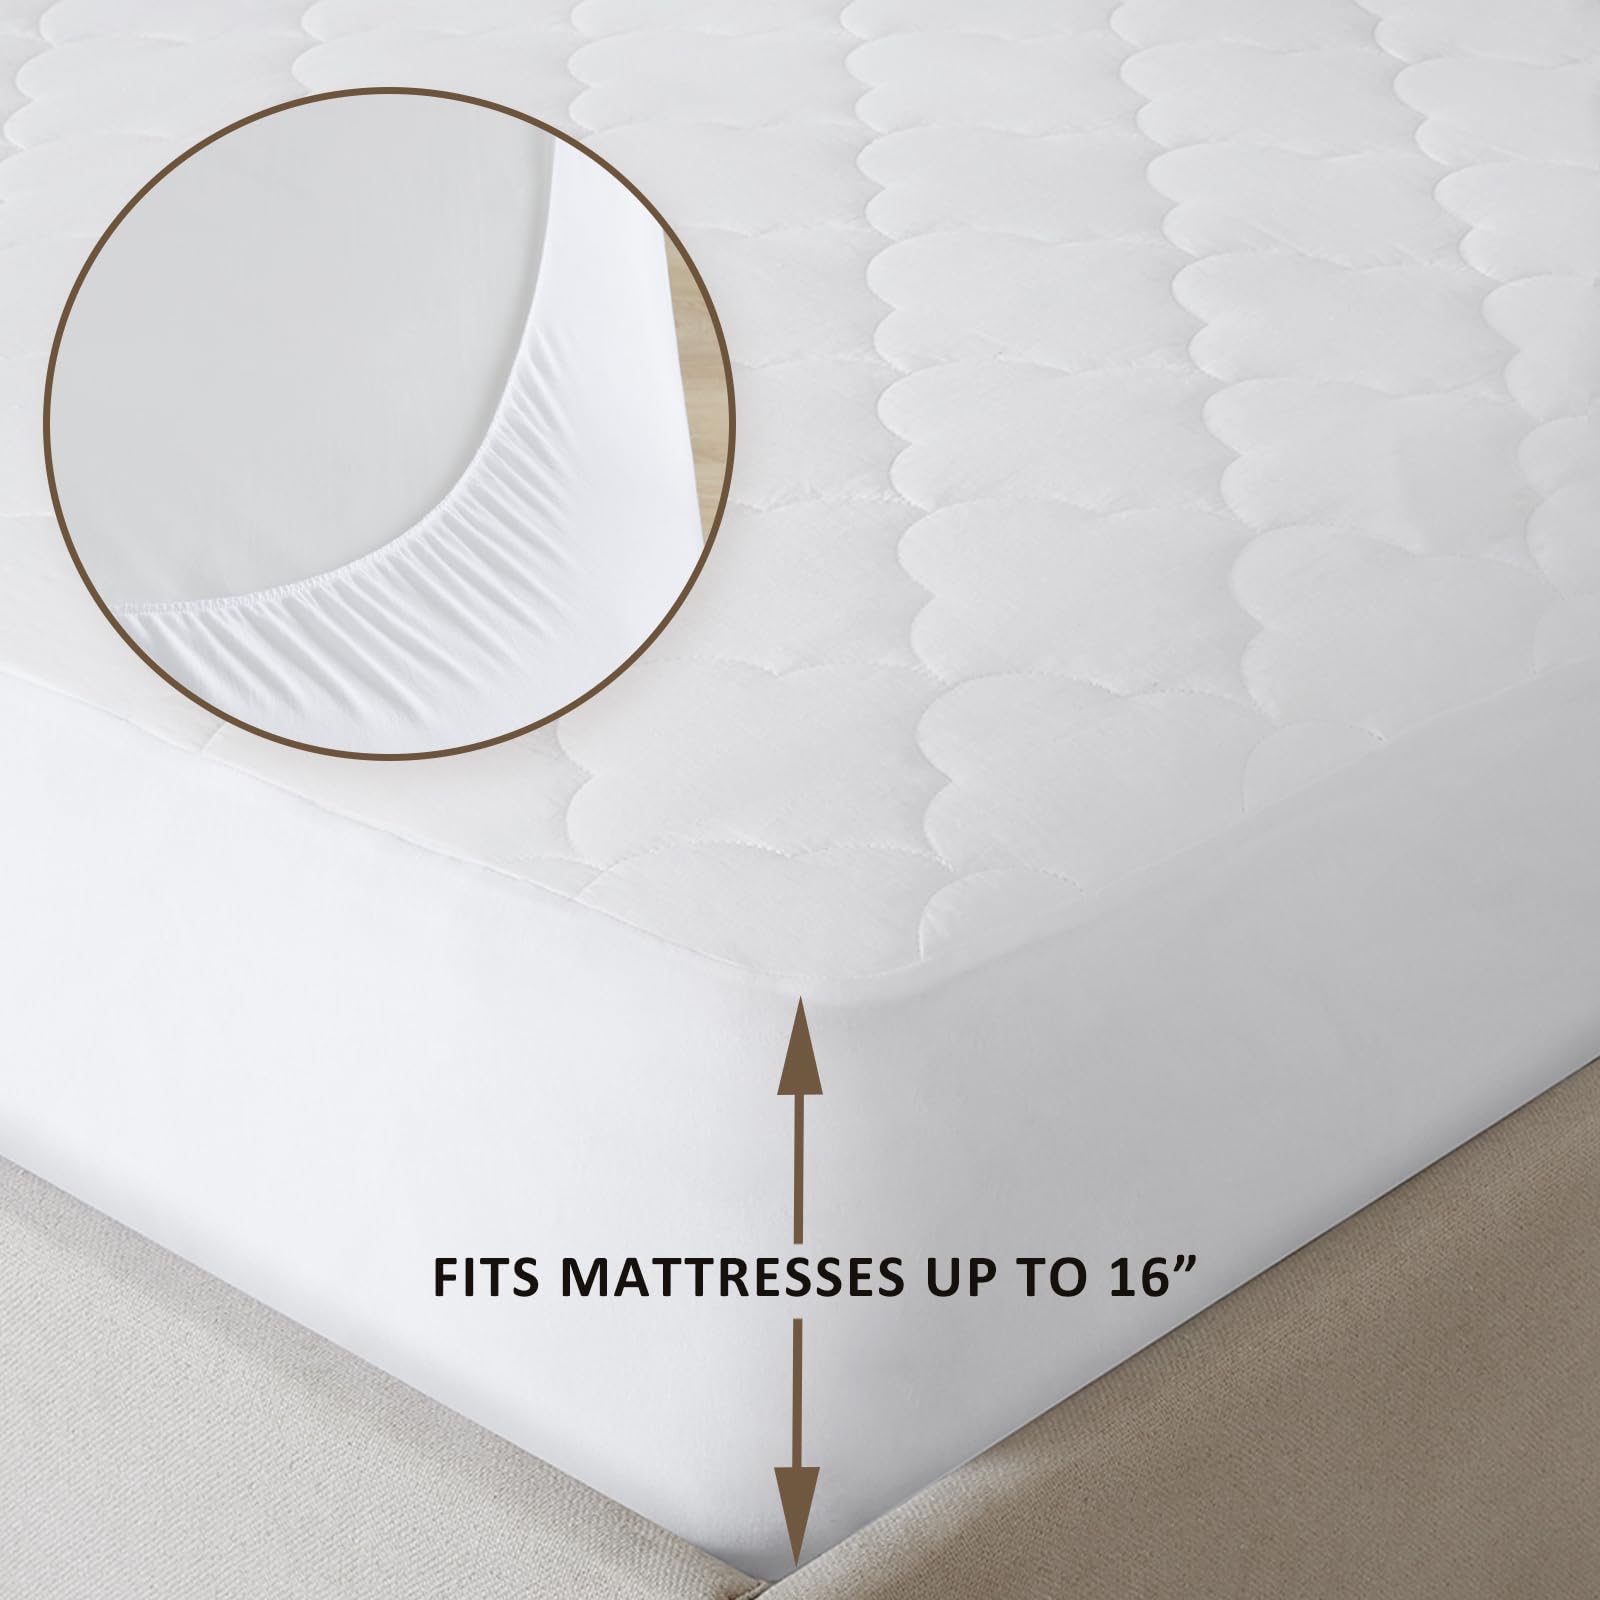 Sleep Philosophy King Mattress Pad, Cotton Mattress Protector Classic Cloud Quilted Bed Cover, All Natural Breathable Mattress T